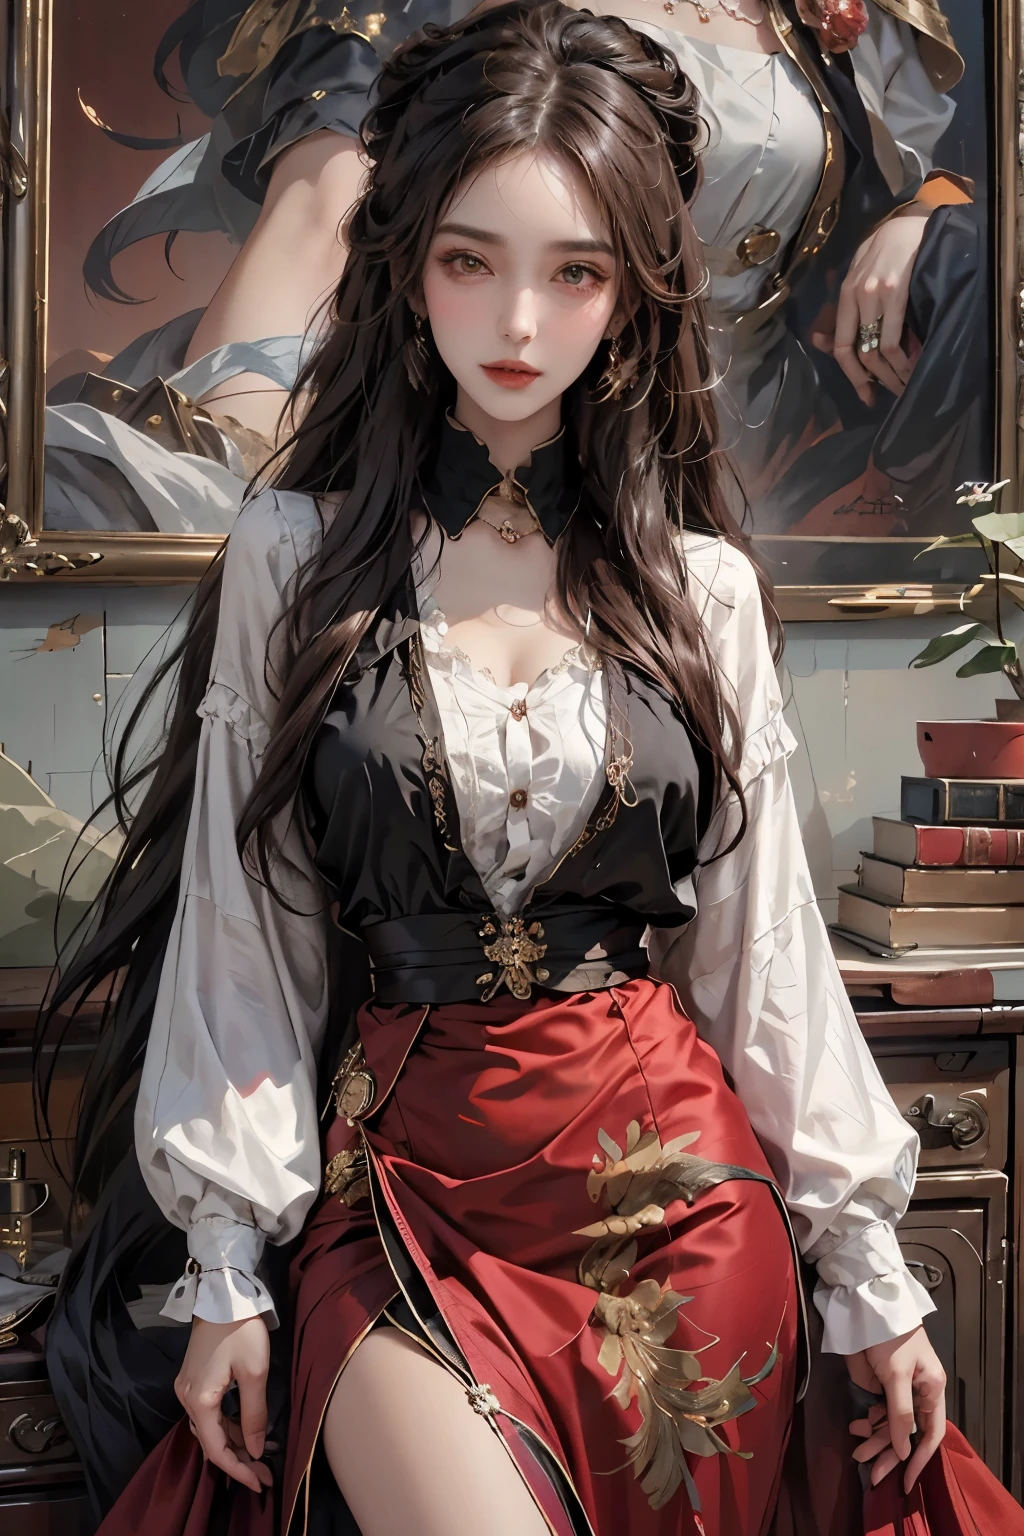 An anthropomorphic Afghan hound with big, happy eyes and a seductive look, clad in Victorian-era attire, flirts with an unseen viewer. Her full body is elegantly painted in the style of Ian McQue, showcasing intricate details and bold red accents. The hound's red belt, adorned with intricate designs, cinches her waist, while her long ears droop playfully. Her smile is as captivating as the rich, textured background filled with steampunk machinery and red hues, creating an alluring and mesmerizing scene. This masterpiece is a high-resolution, ultra-detailed oil painting, capturing the charm